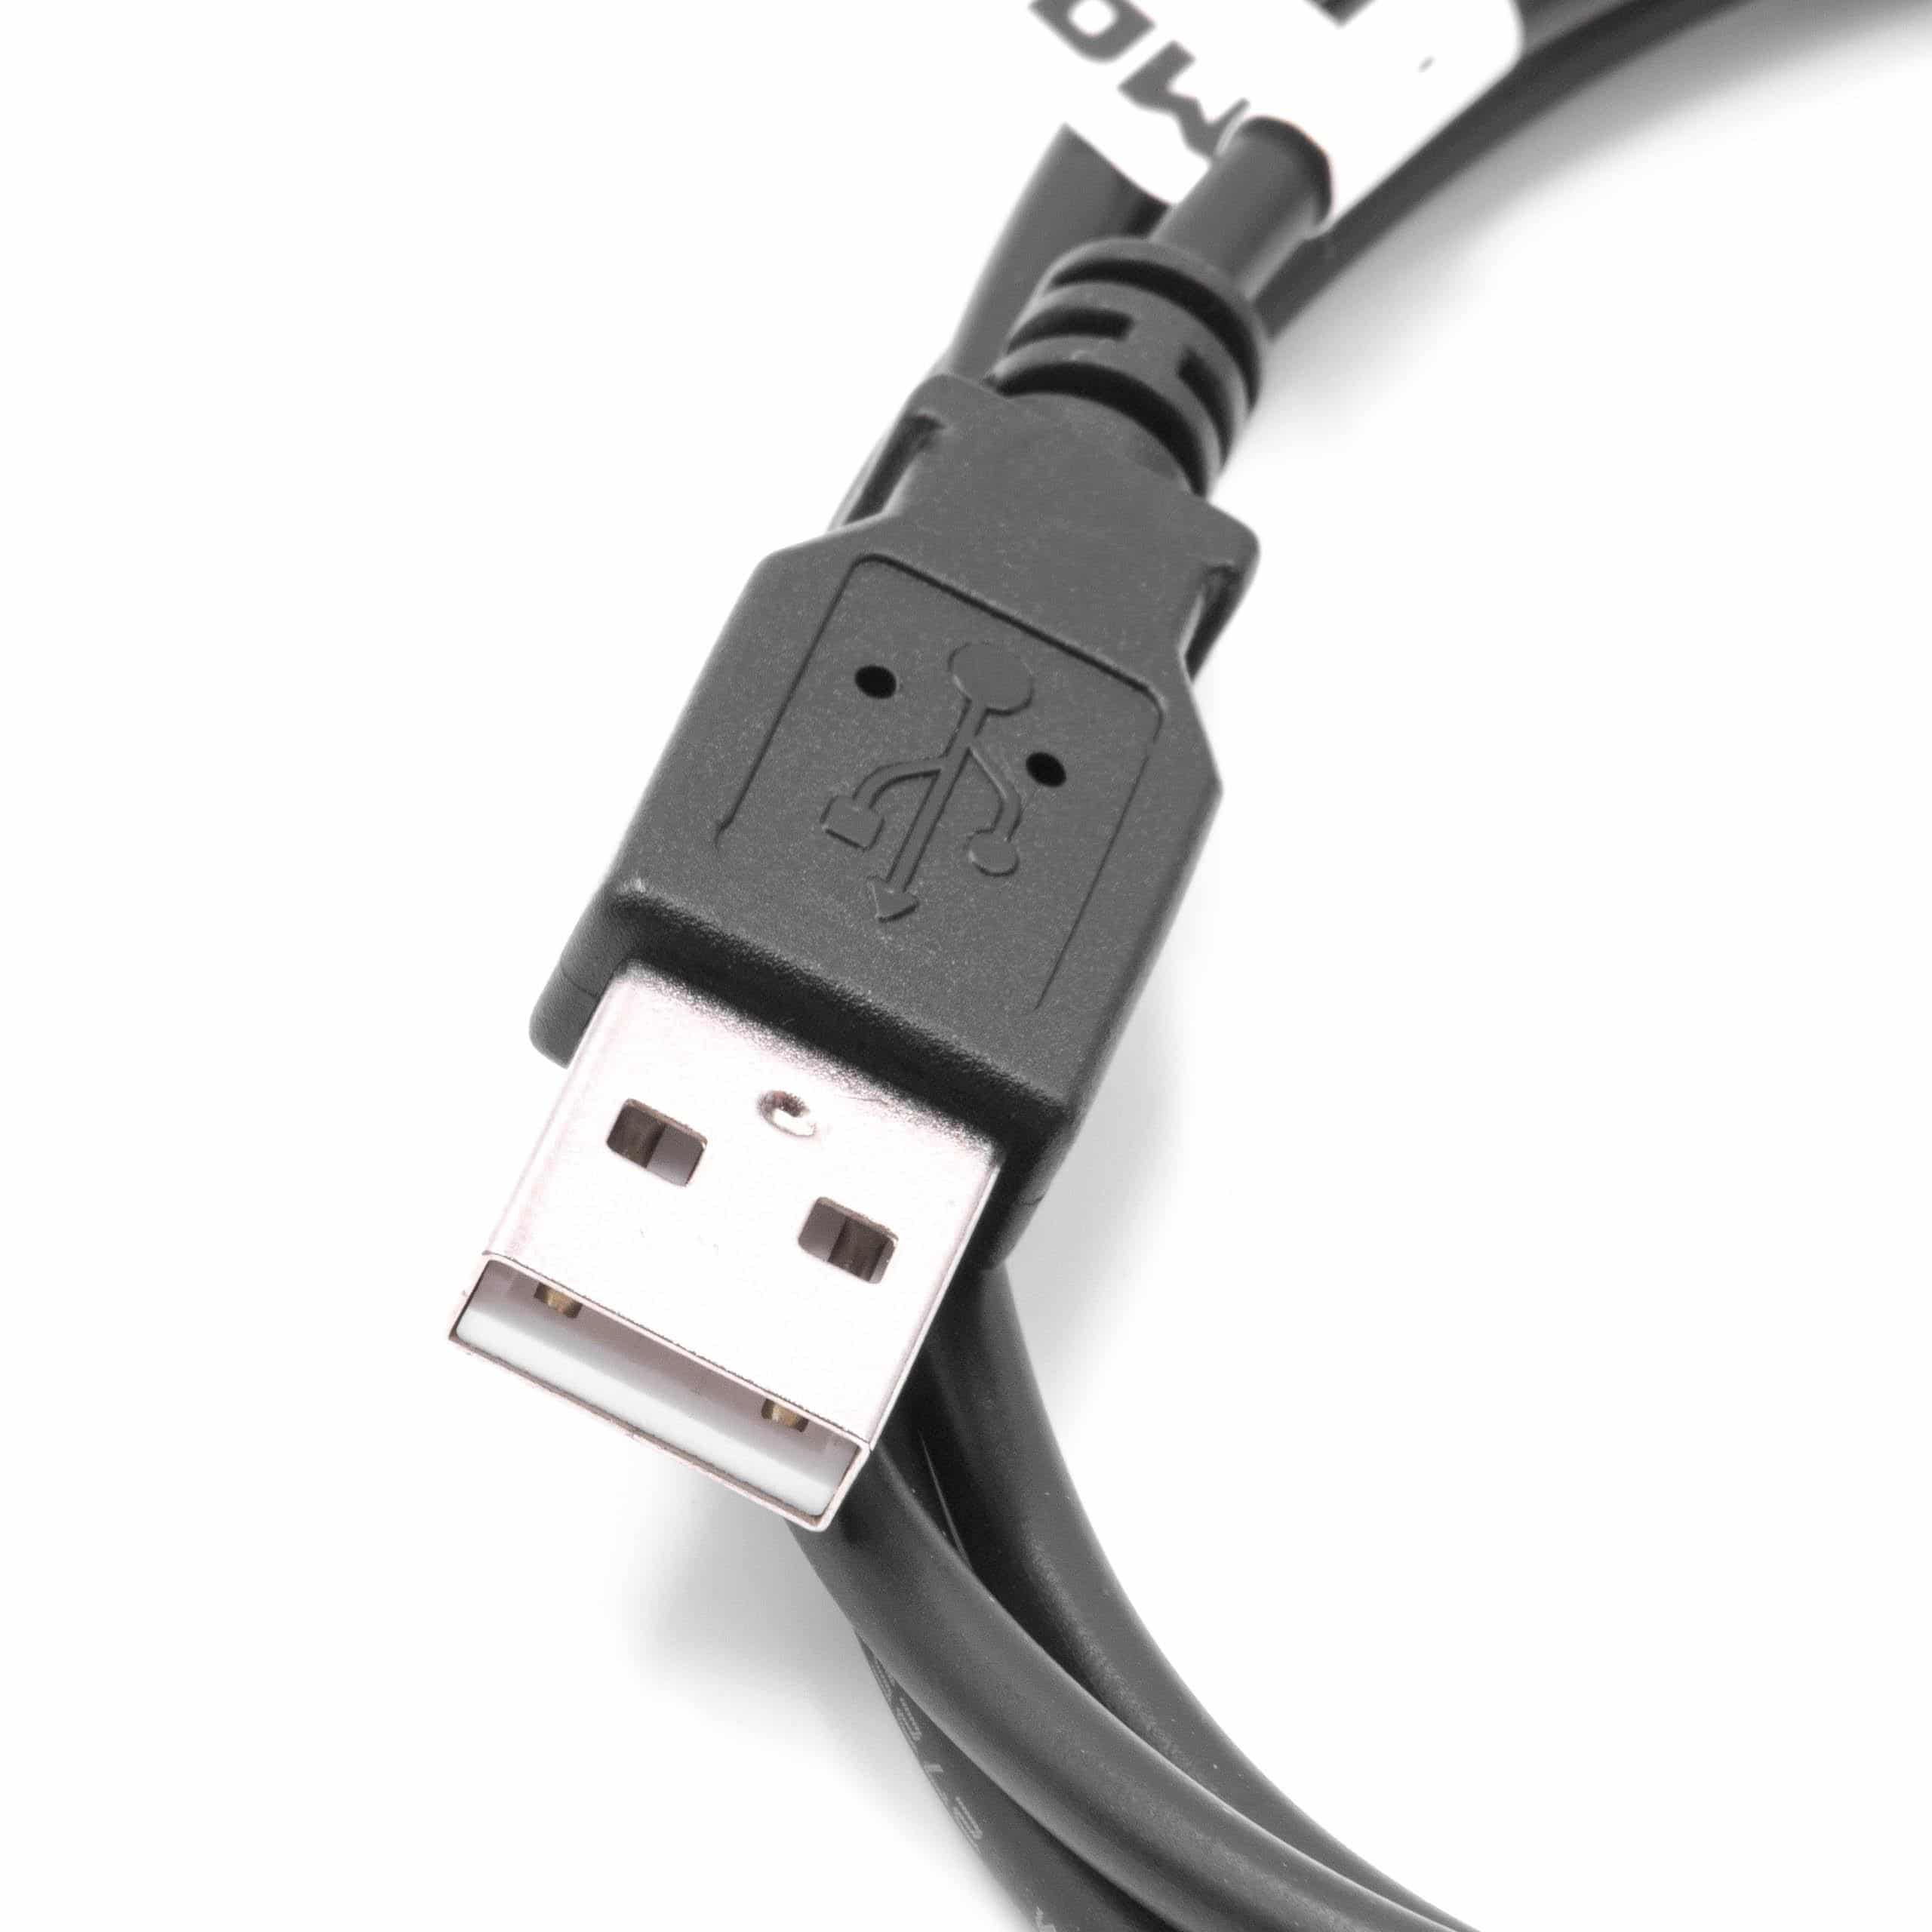 USB Data Cable Charging Cable suitable for Microsoft Zune etc., 100 cm